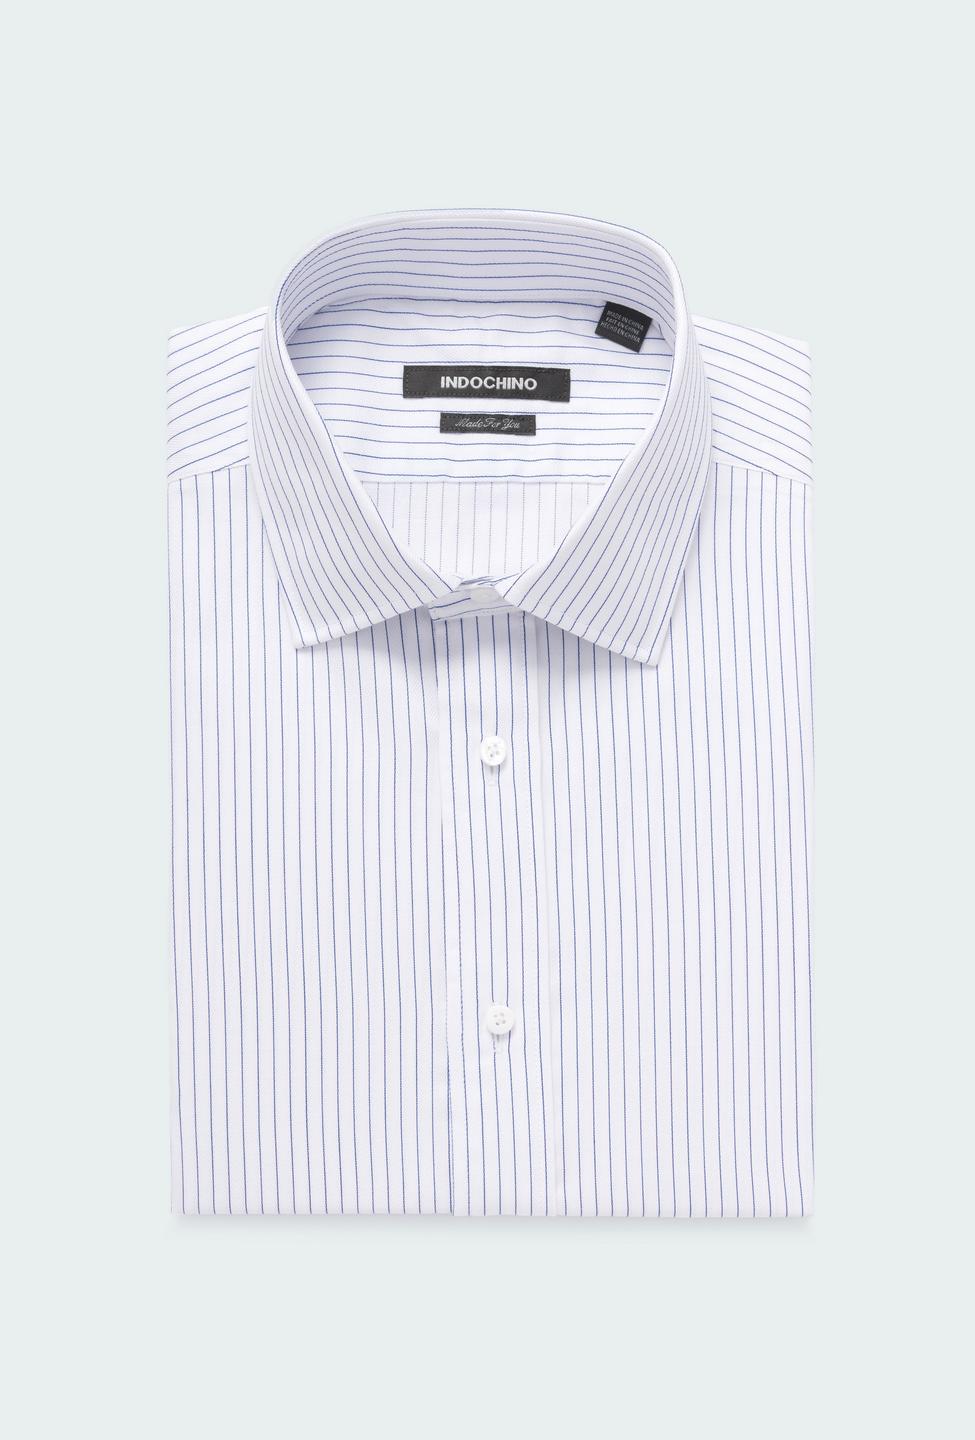 Blue shirt - Denton Striped Design from Seasonal Indochino Collection